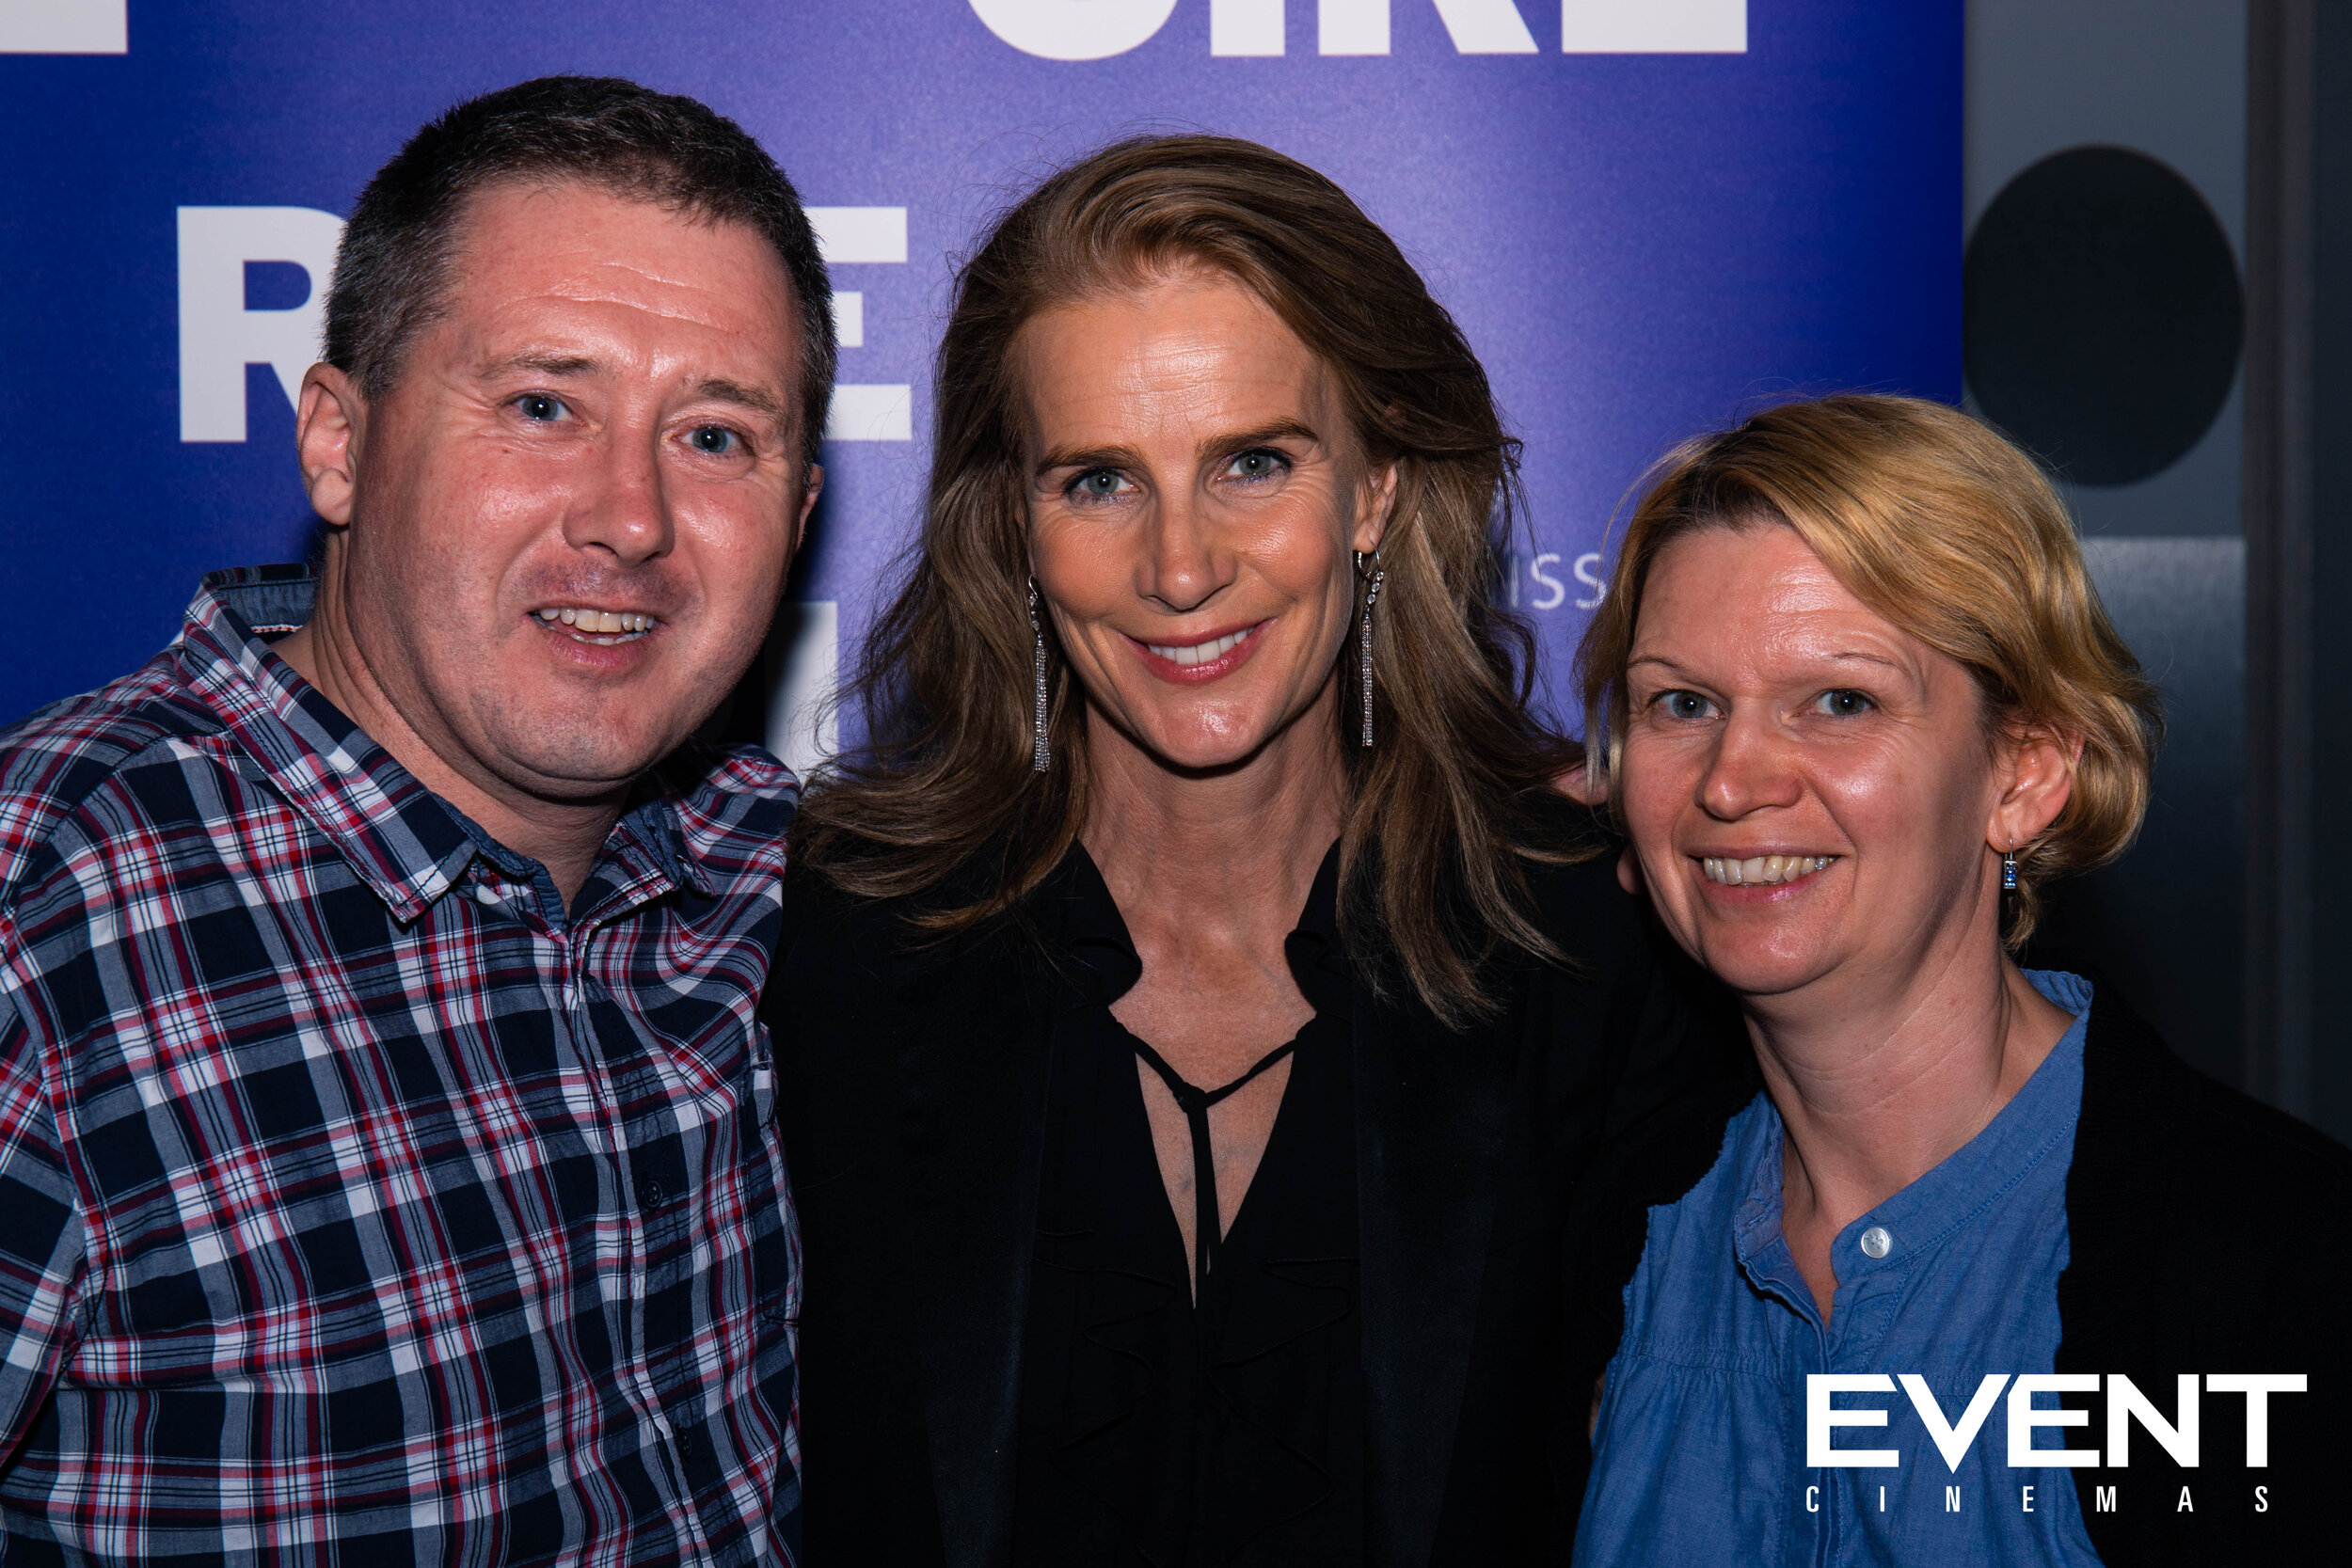 Rachel Griffiths with Townsville locals at the Ride Like a Girl Movie Premier